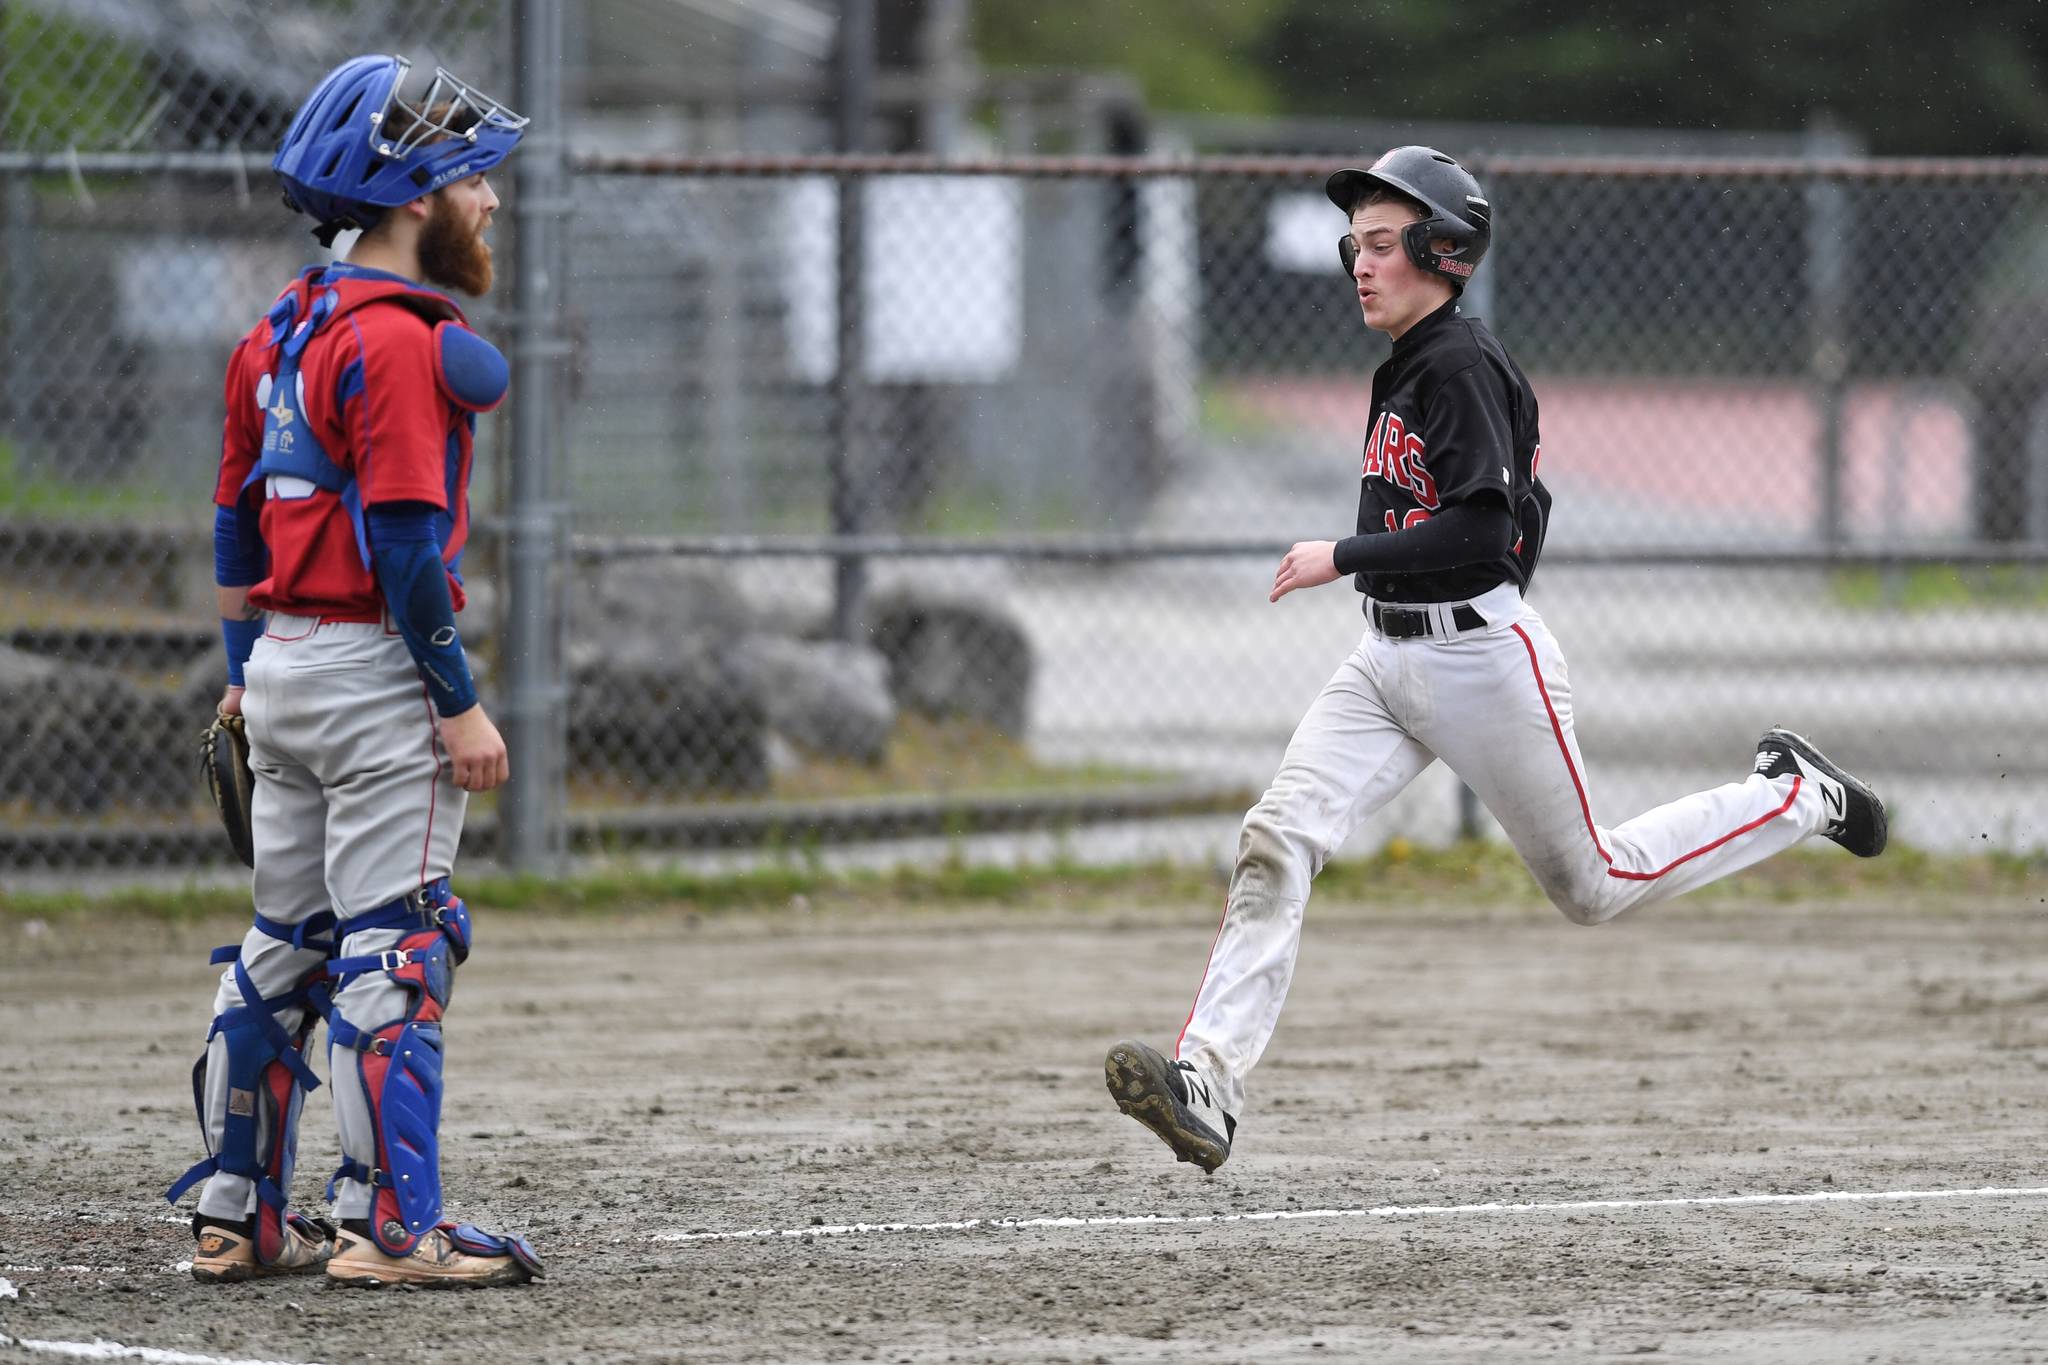 Juneau-Douglas’ Carter Walker races for home plate on a double by Luis Mojica in the second inning as Sitka’s catcher Morgan Simic waits for the ball during the Region V Baseball Championship at Adair-Kennedy Memorial Park on Thursday, May 23, 2019. (Michael Penn | Juneau Empire)